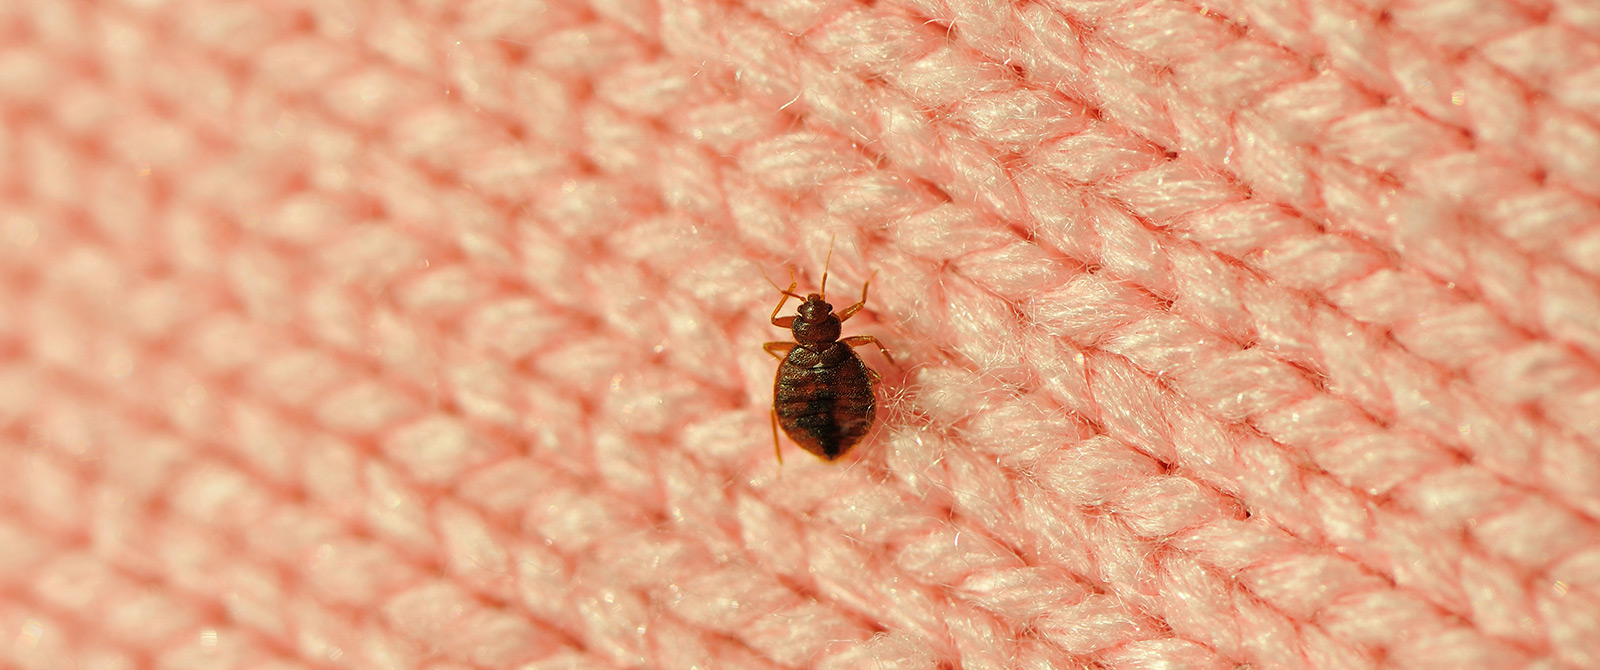 Bed Bugs Control Services in Karachi